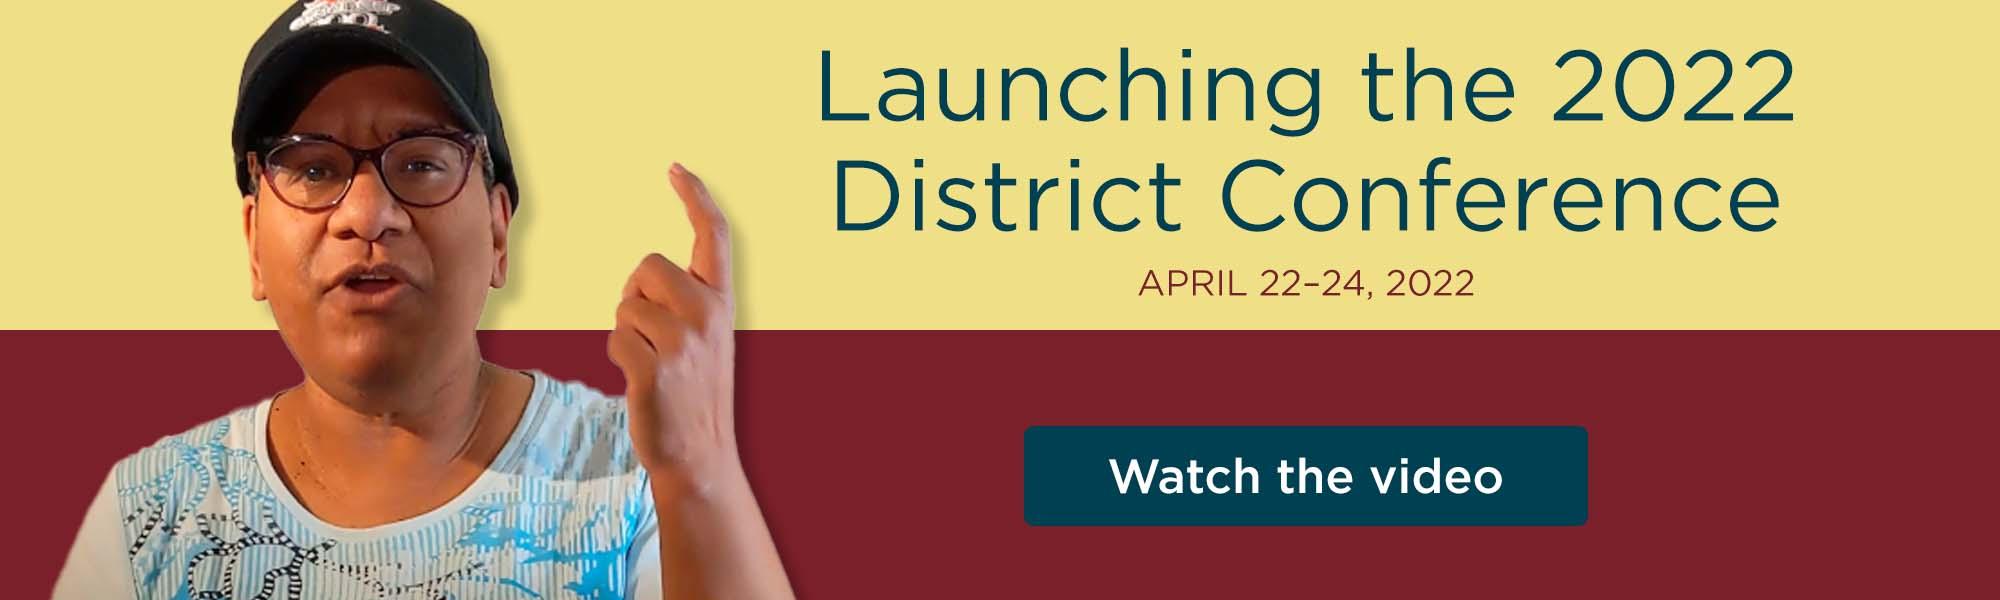 Launching the 2022 District Conference